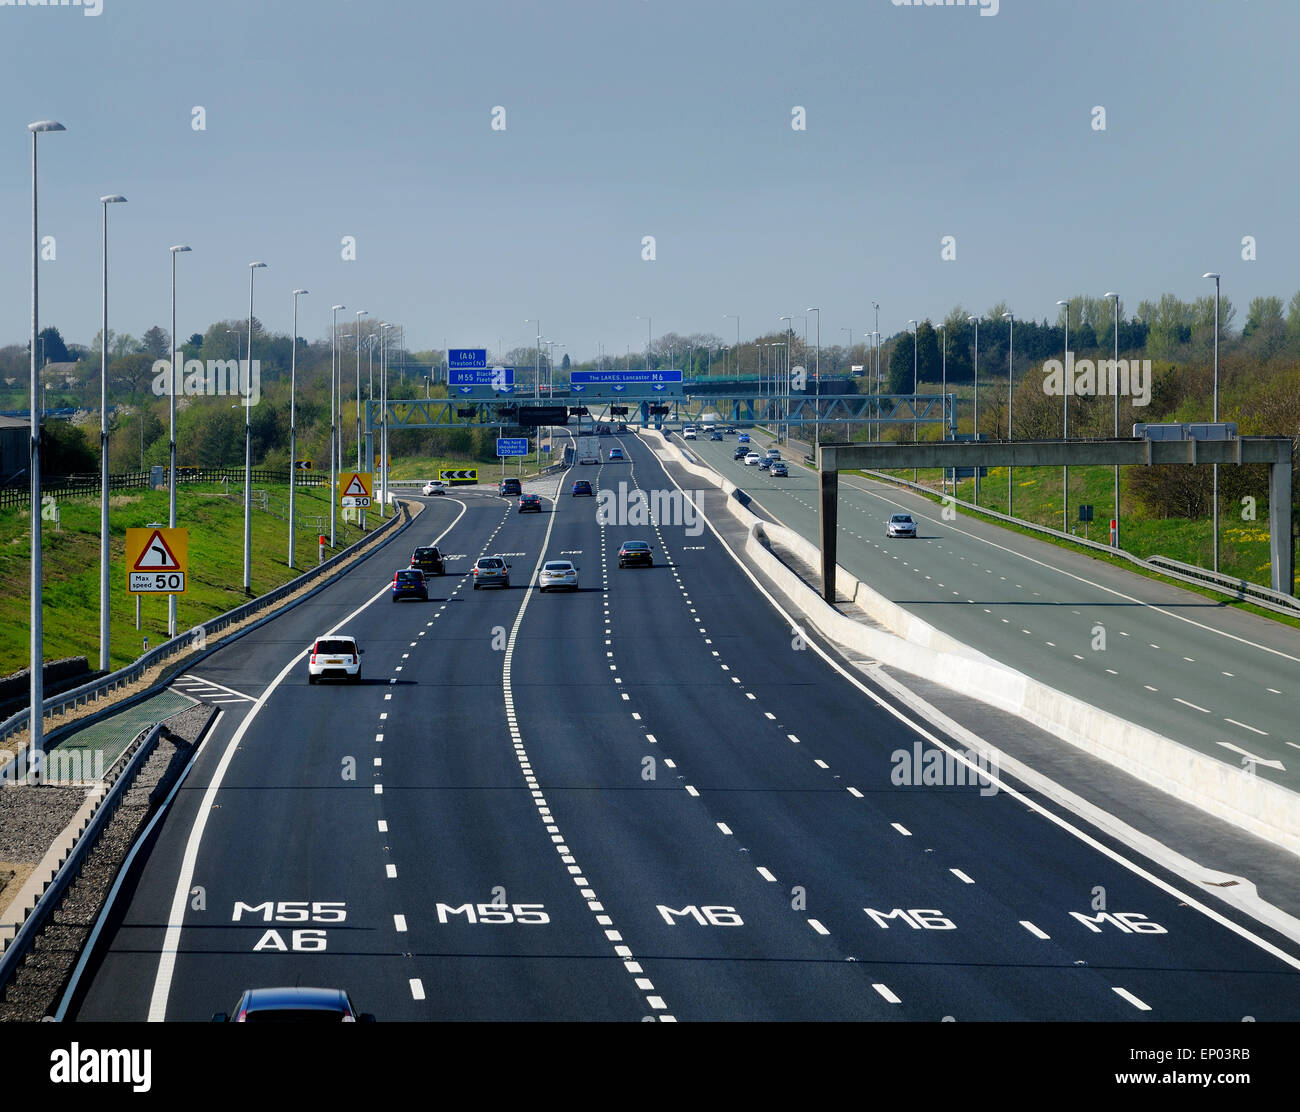 safety barrier central reservation motorway Stock Photo